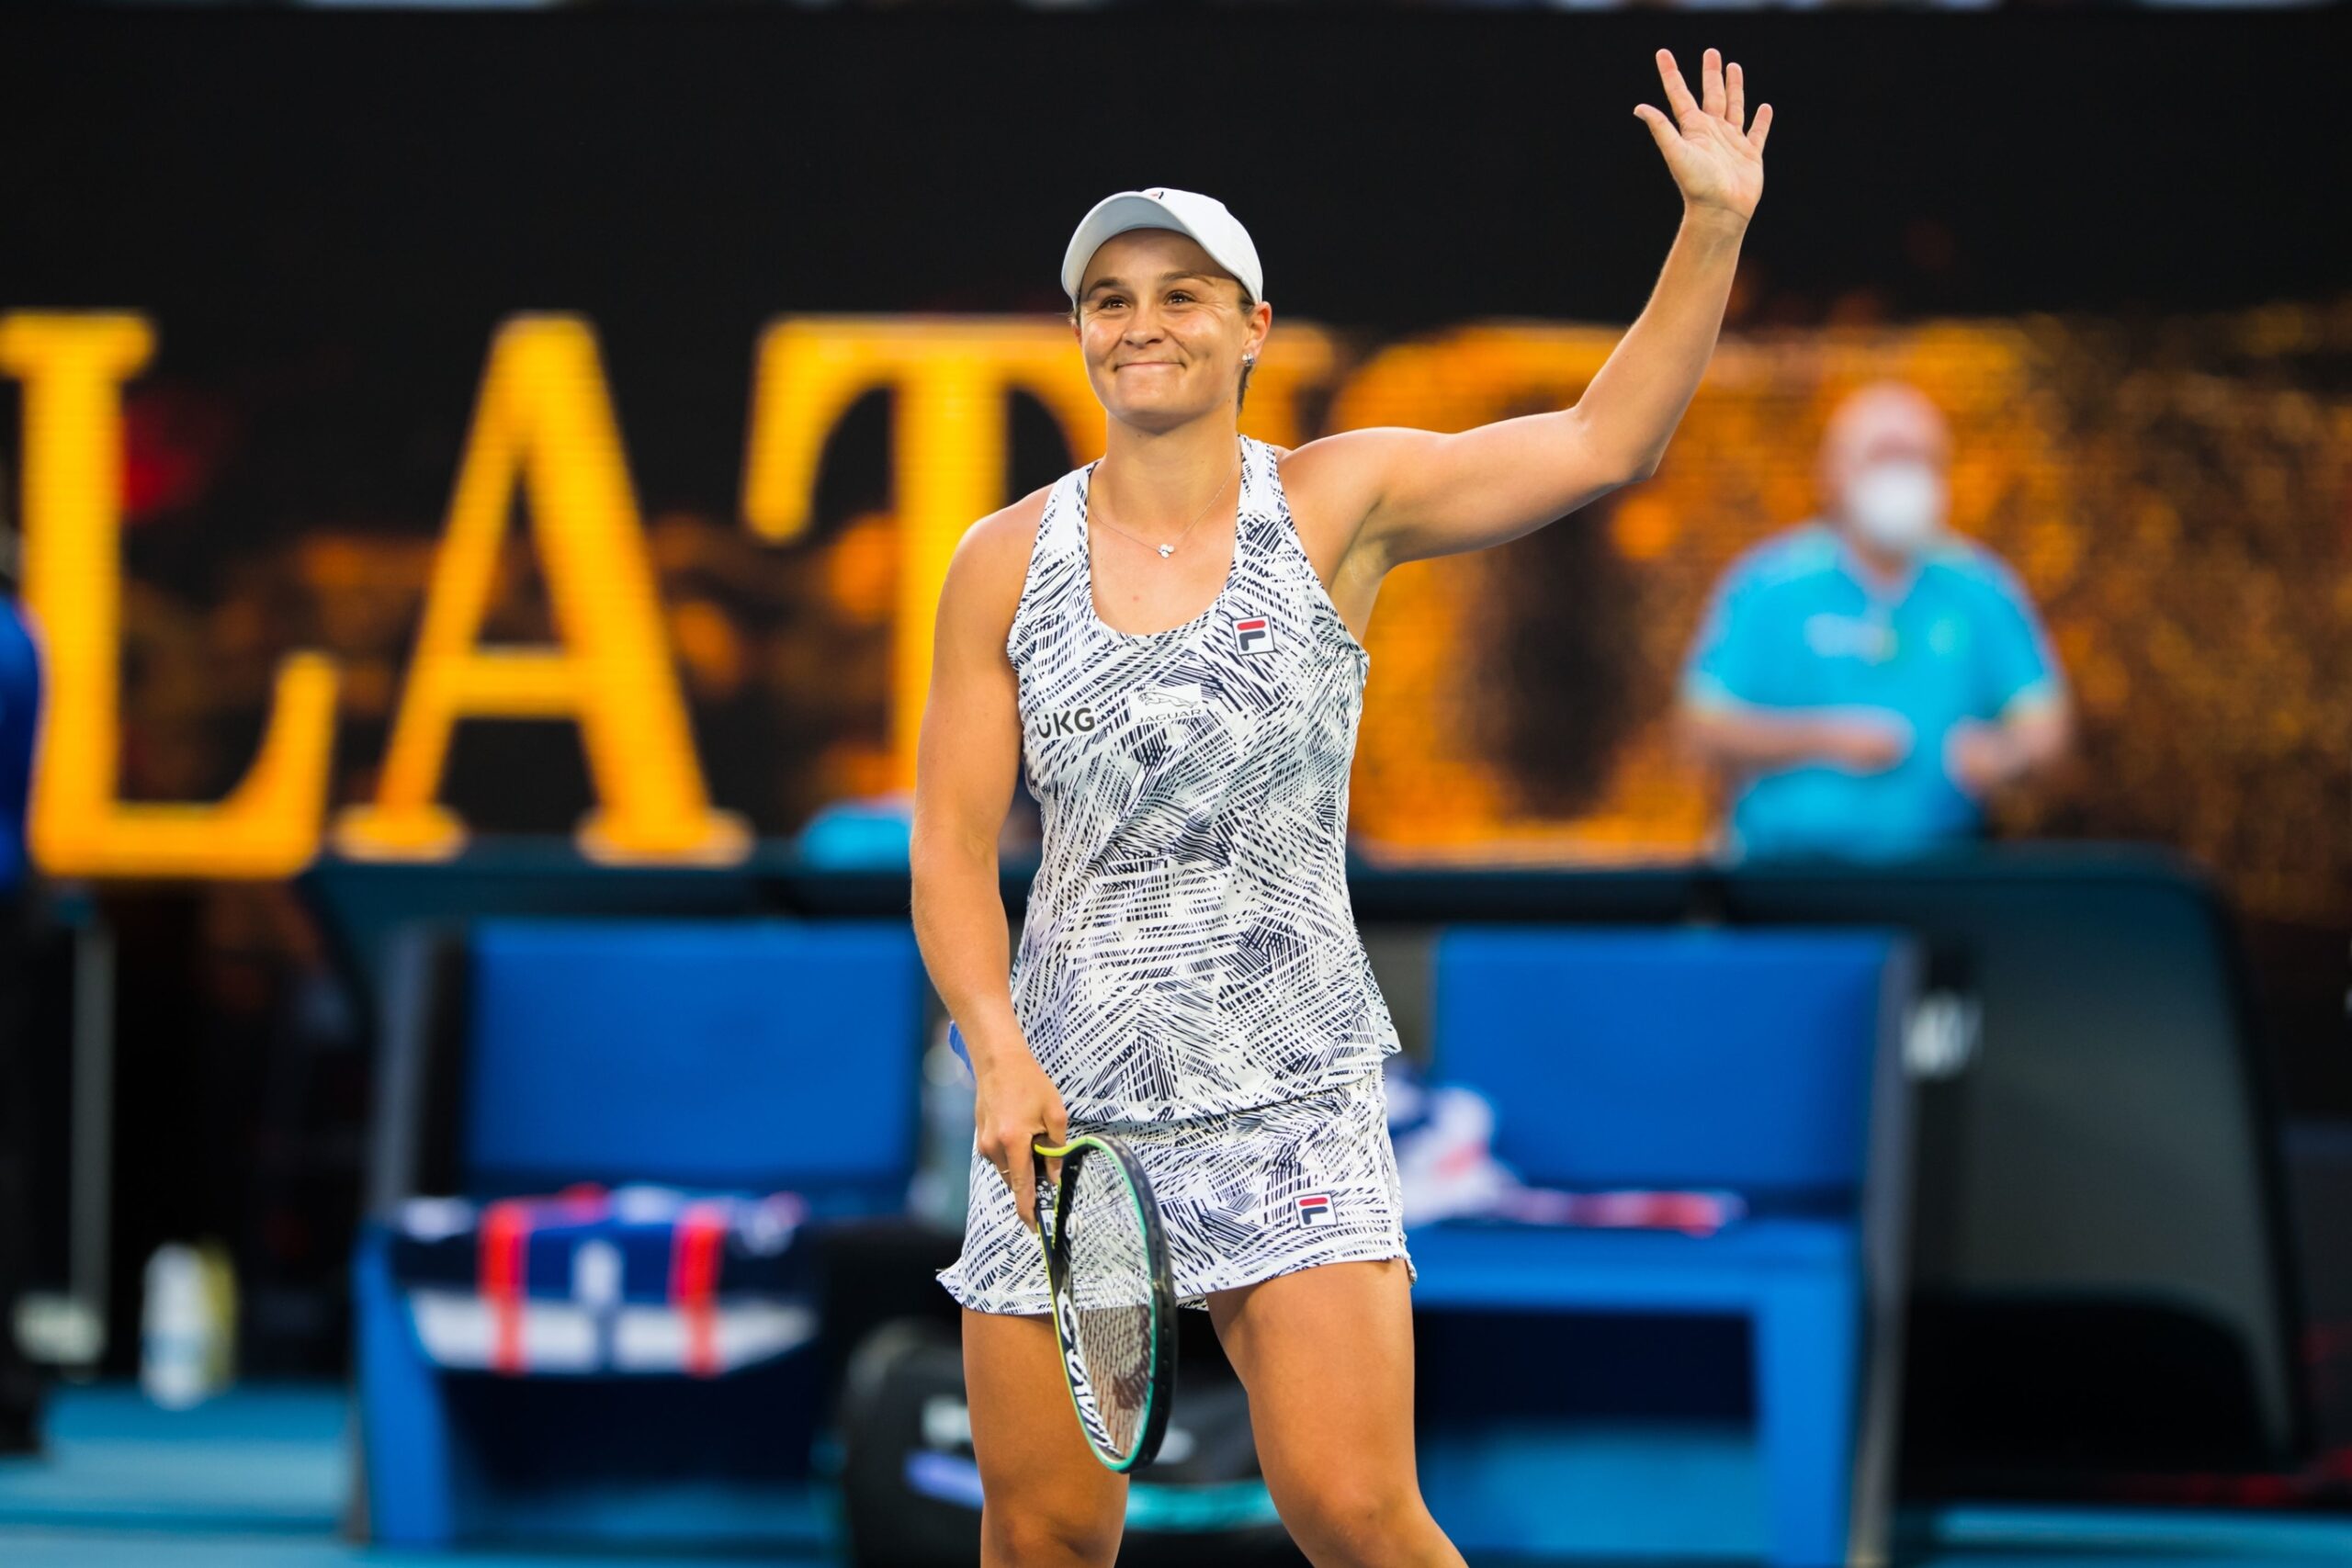 Odds On Australian Tennis Star Barty To Return To The Sport